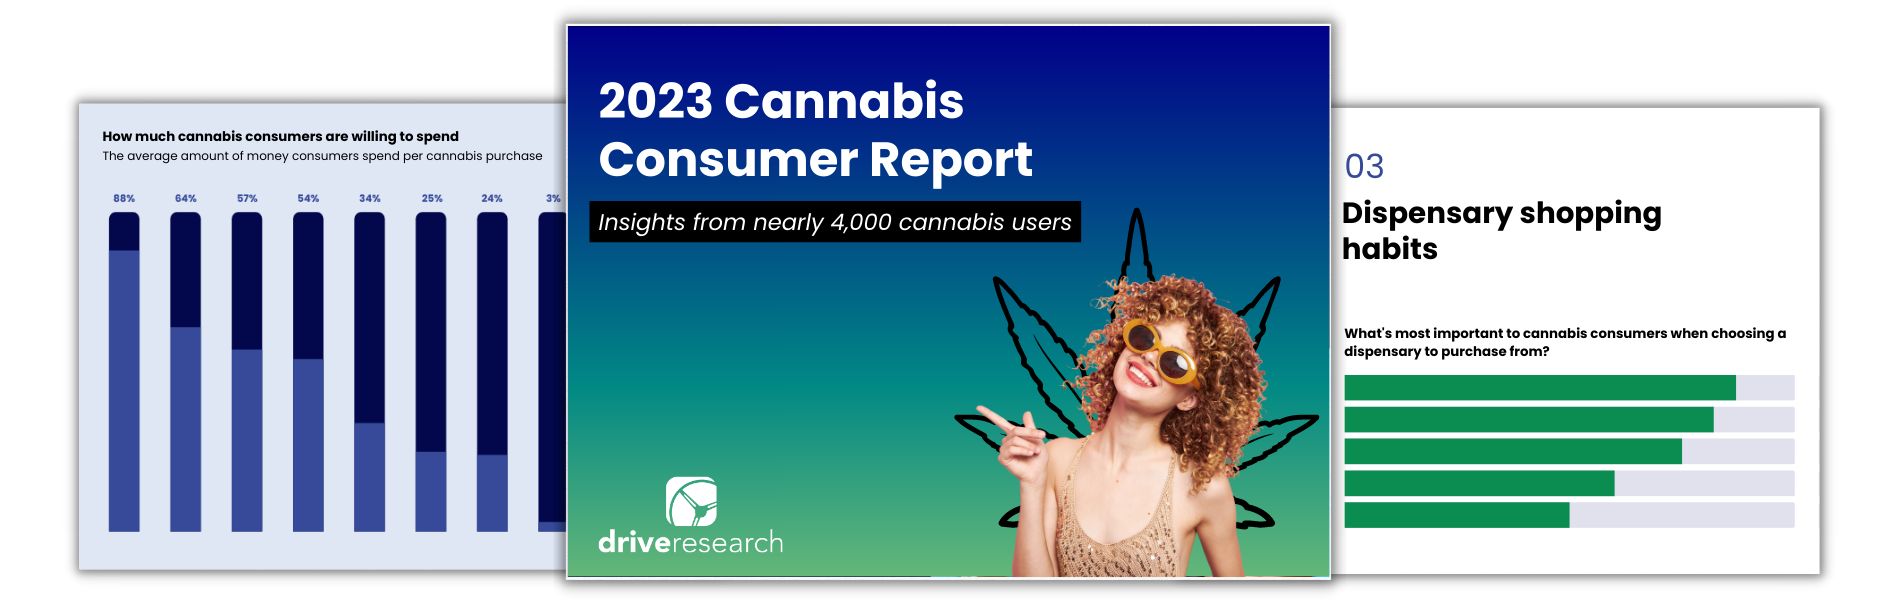 cannabis consumer report slides - drive research